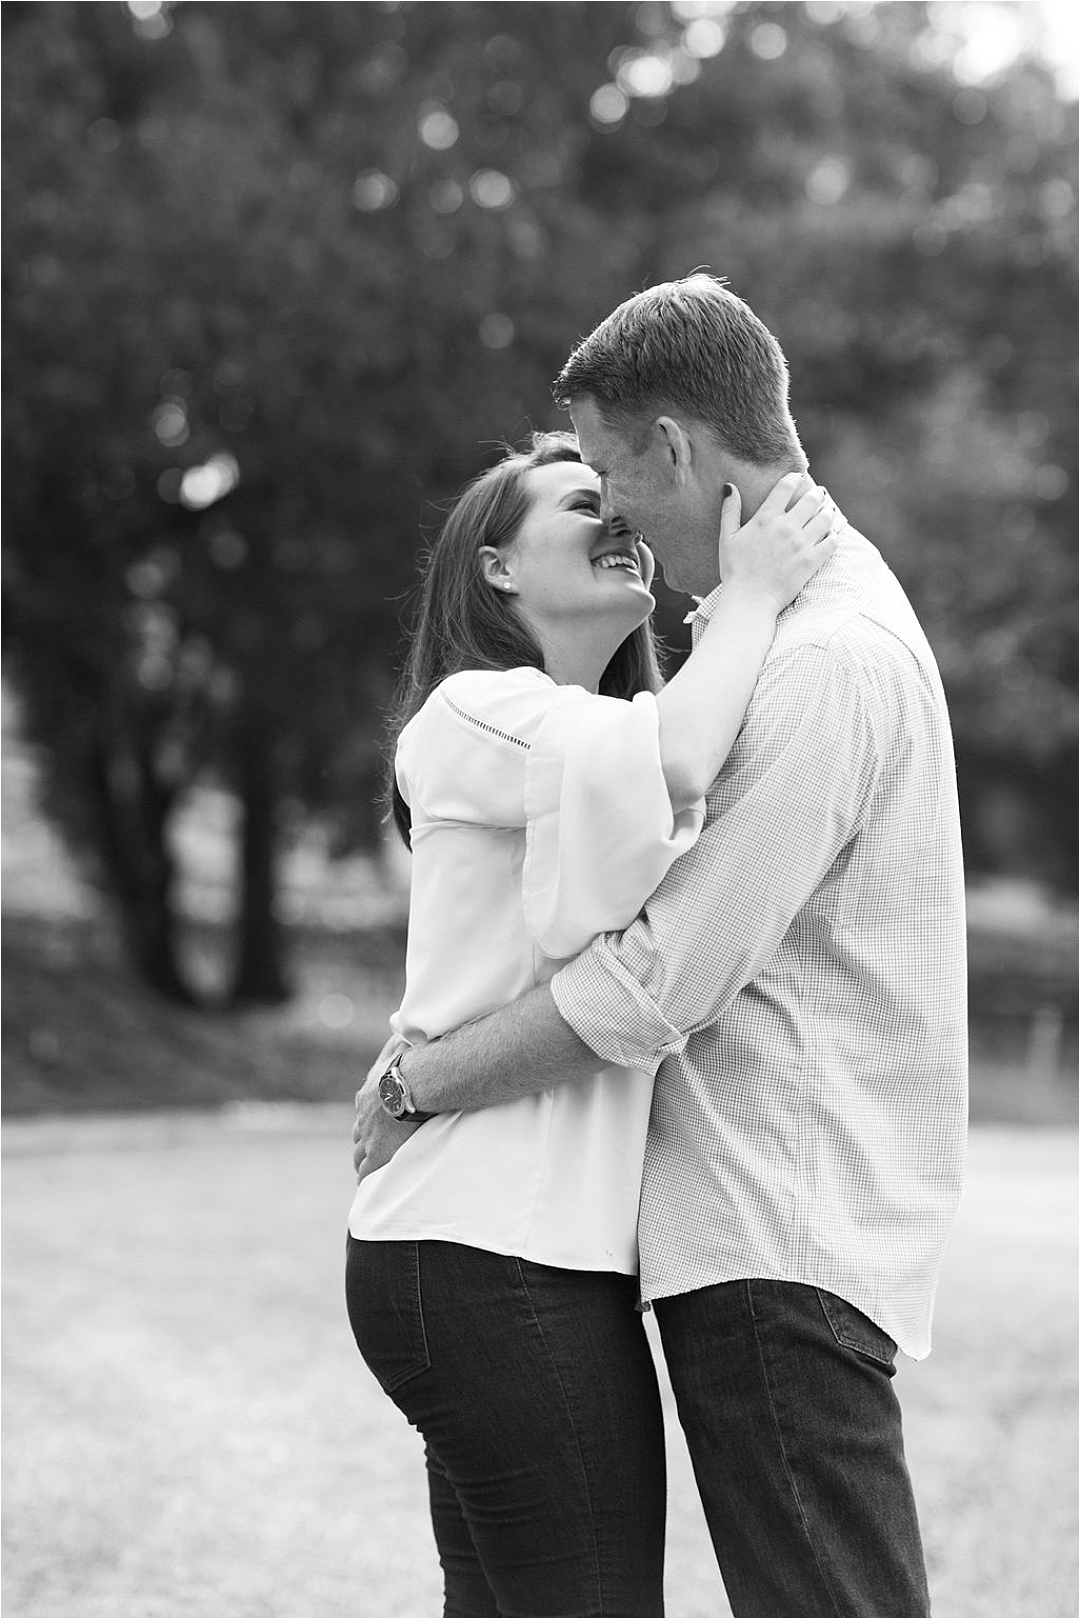 classic engagement portrait_Photos by Leigh Wolfe, Atlanta's Top Wedding Photographer